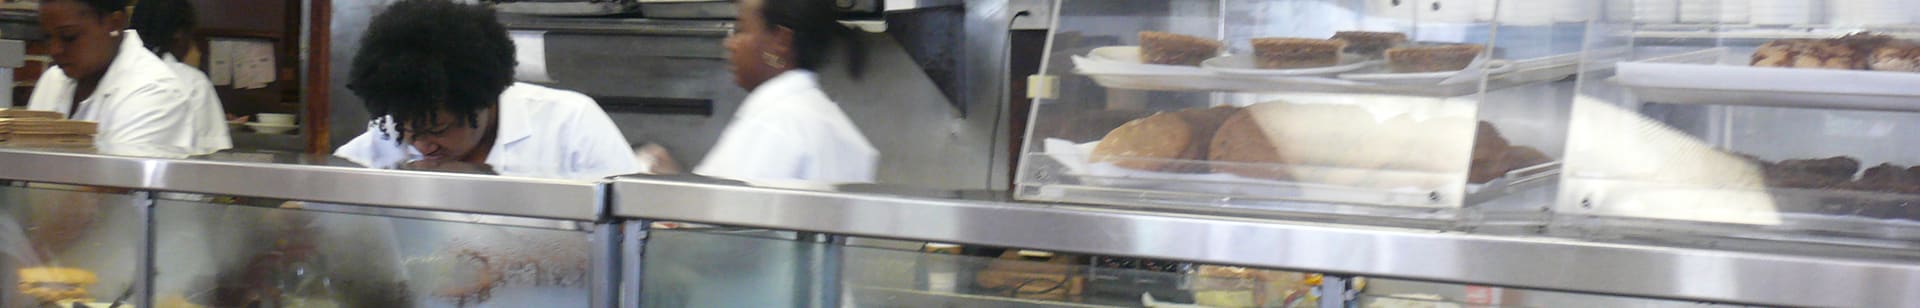 woman wearing white uniform working in the kitchen